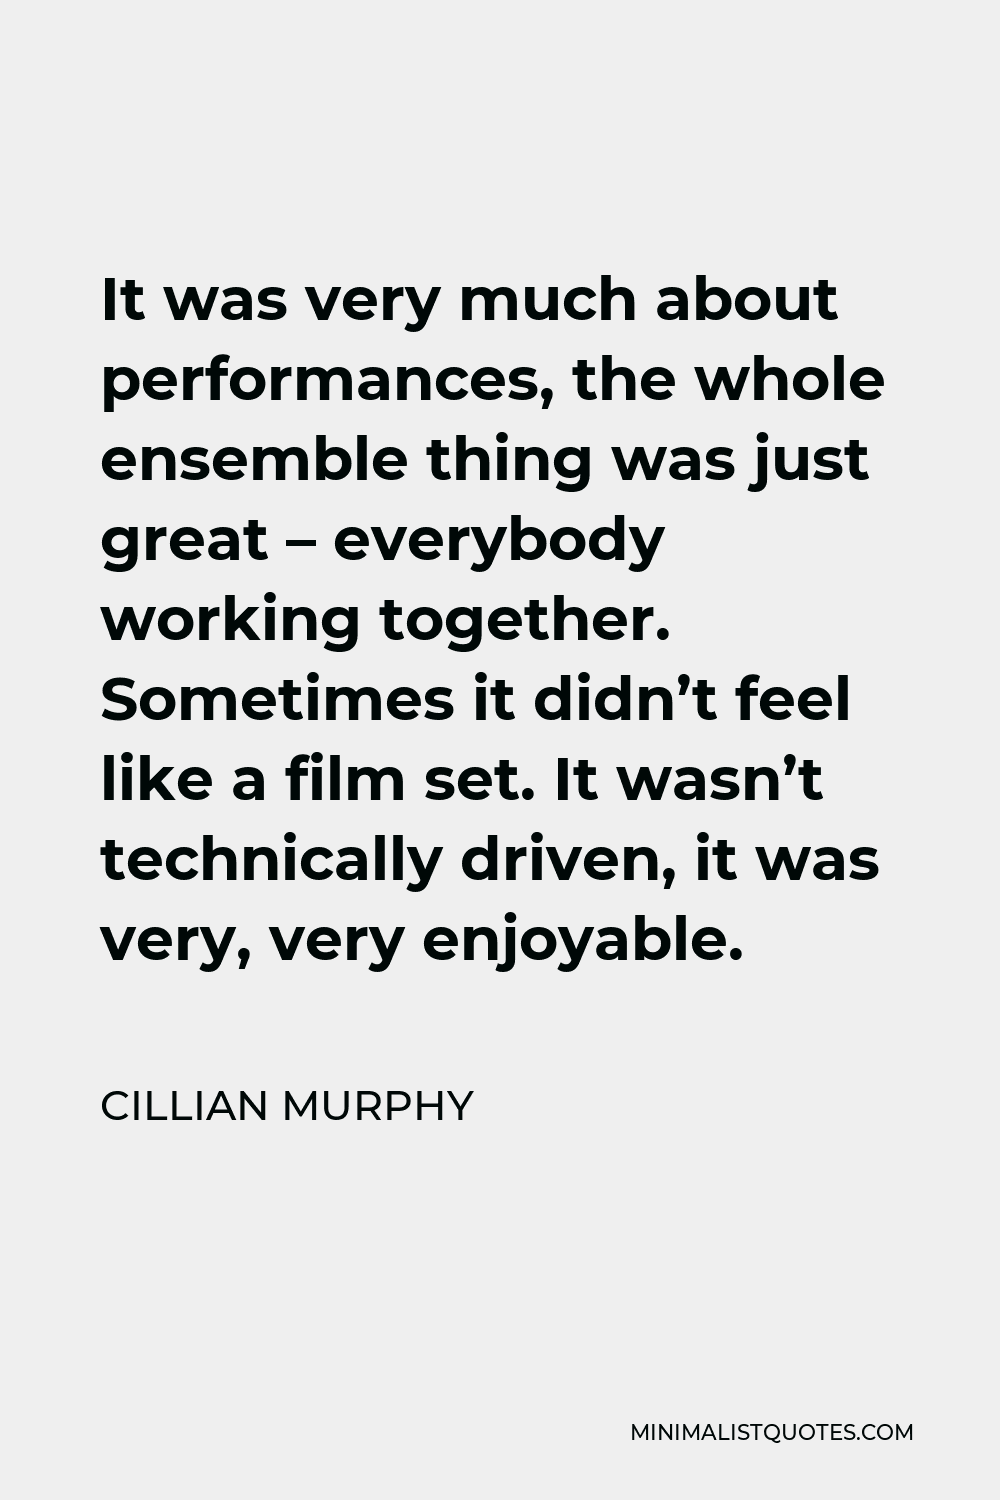 Cillian Murphy Quote - It was very much about performances, the whole ensemble thing was just great – everybody working together. Sometimes it didn’t feel like a film set. It wasn’t technically driven, it was very, very enjoyable.